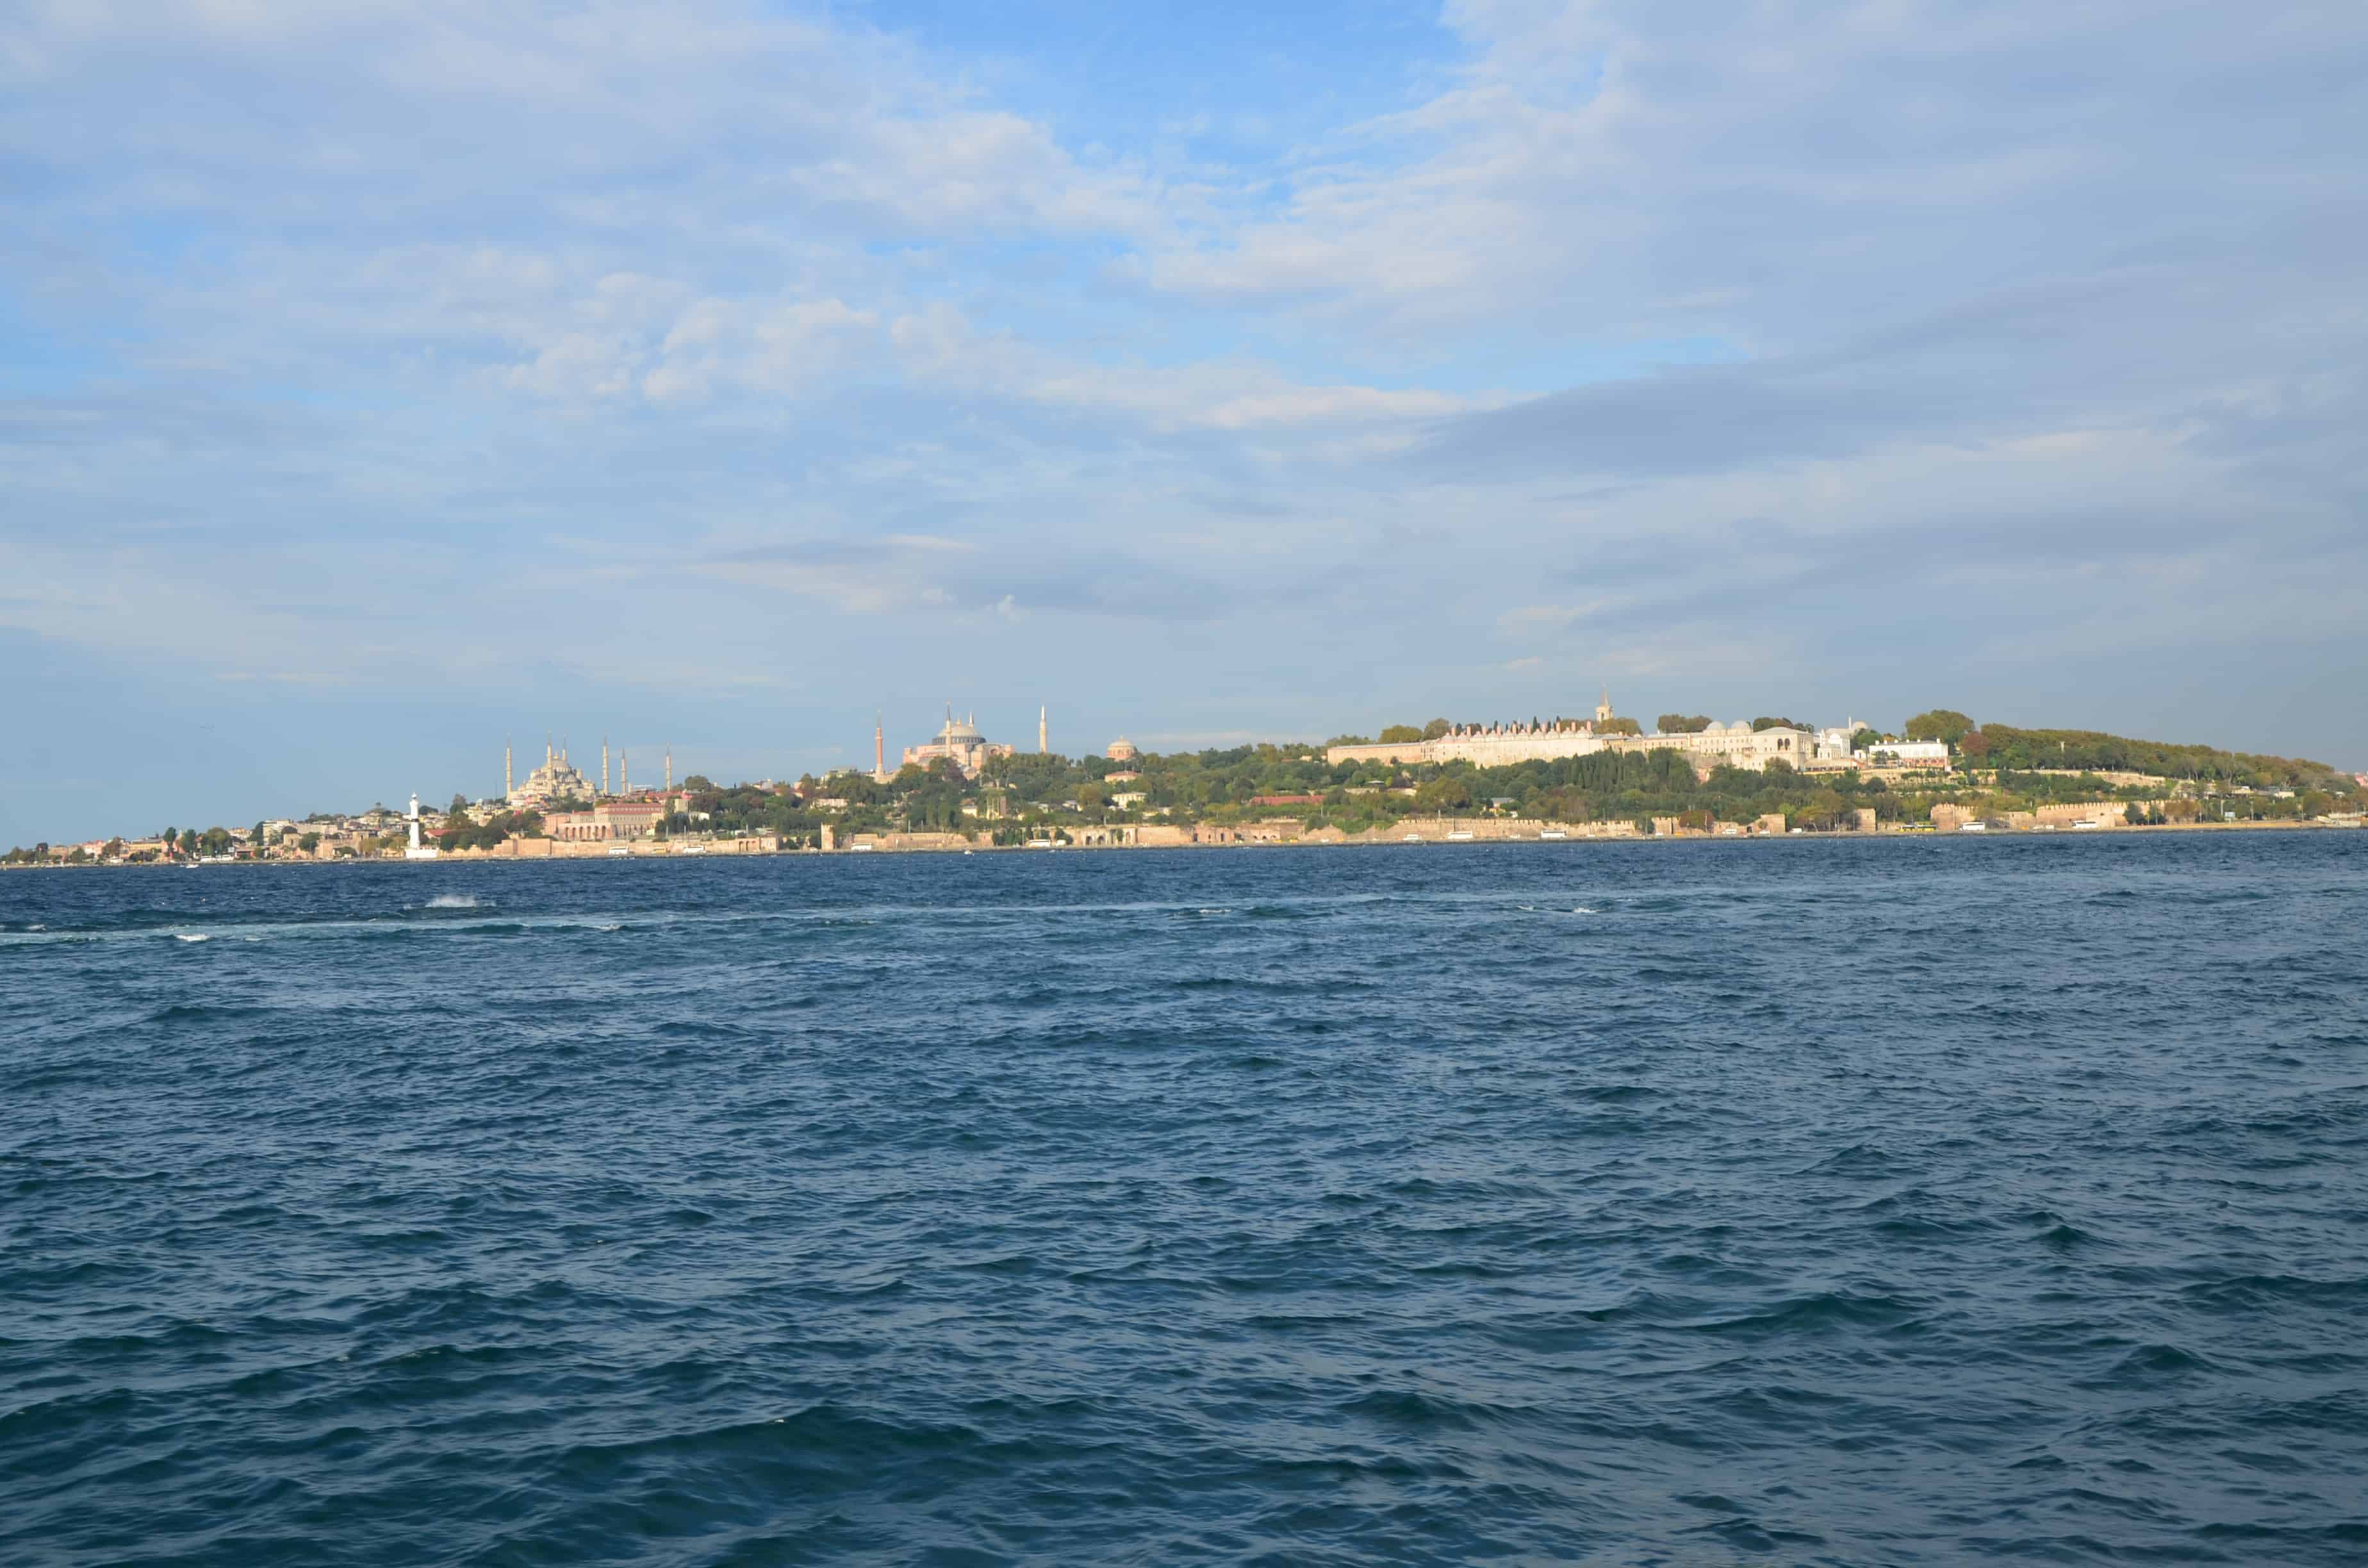 Istanbul's old city on a ferry ride in Istanbul, Turkey